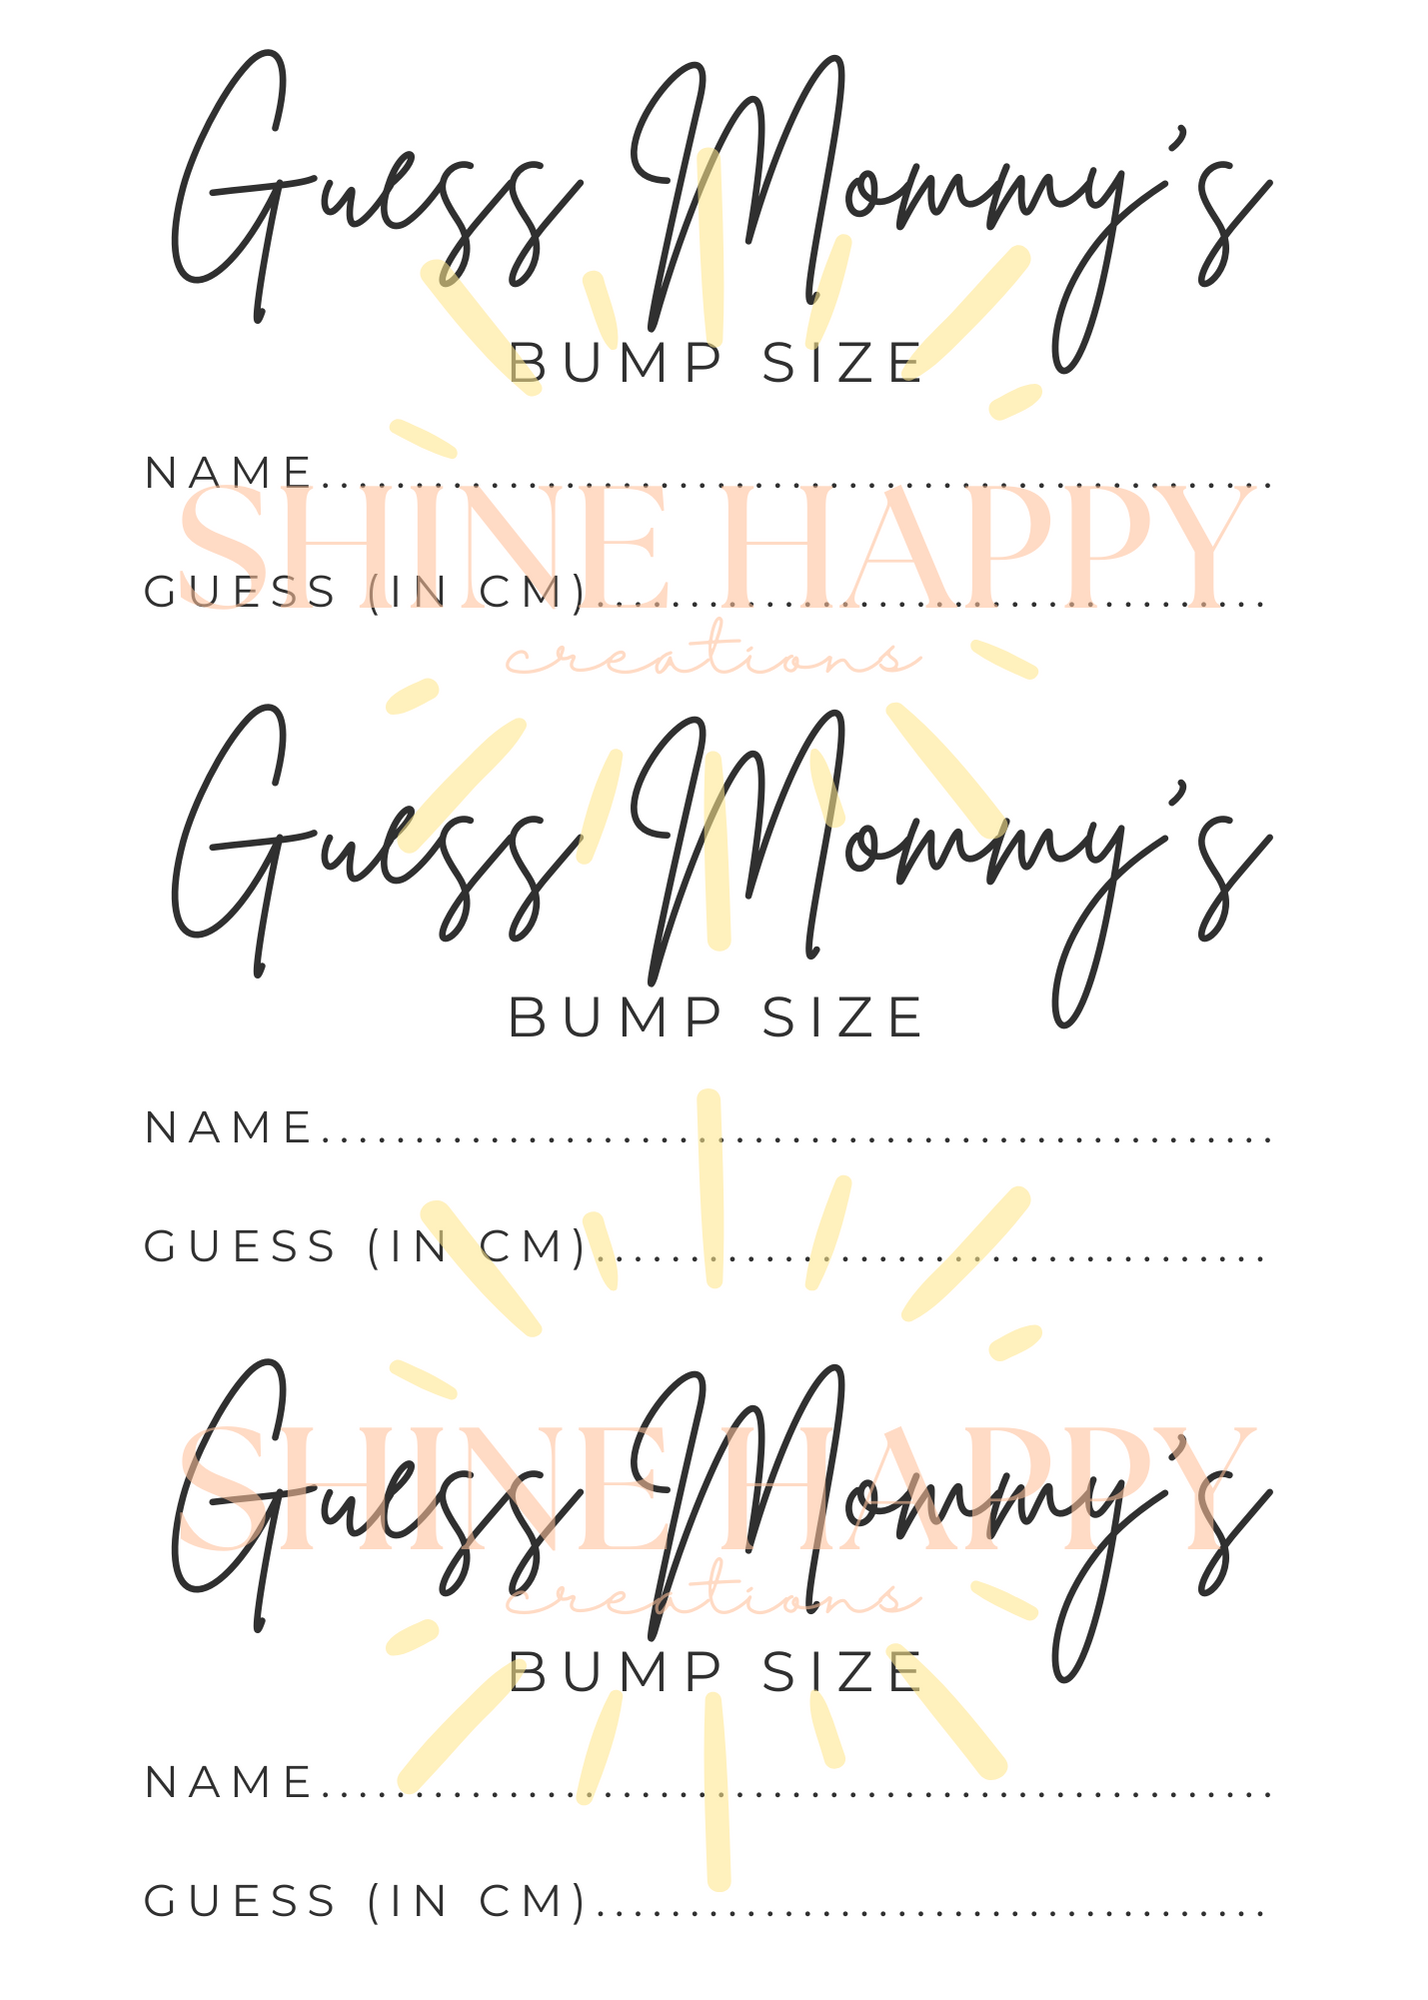 Baby Shower Guest Activity - Guess Mommy's Bump Size - Simplistic with Greenery - DOWNLOADABLE (pdf) PRINTABLE